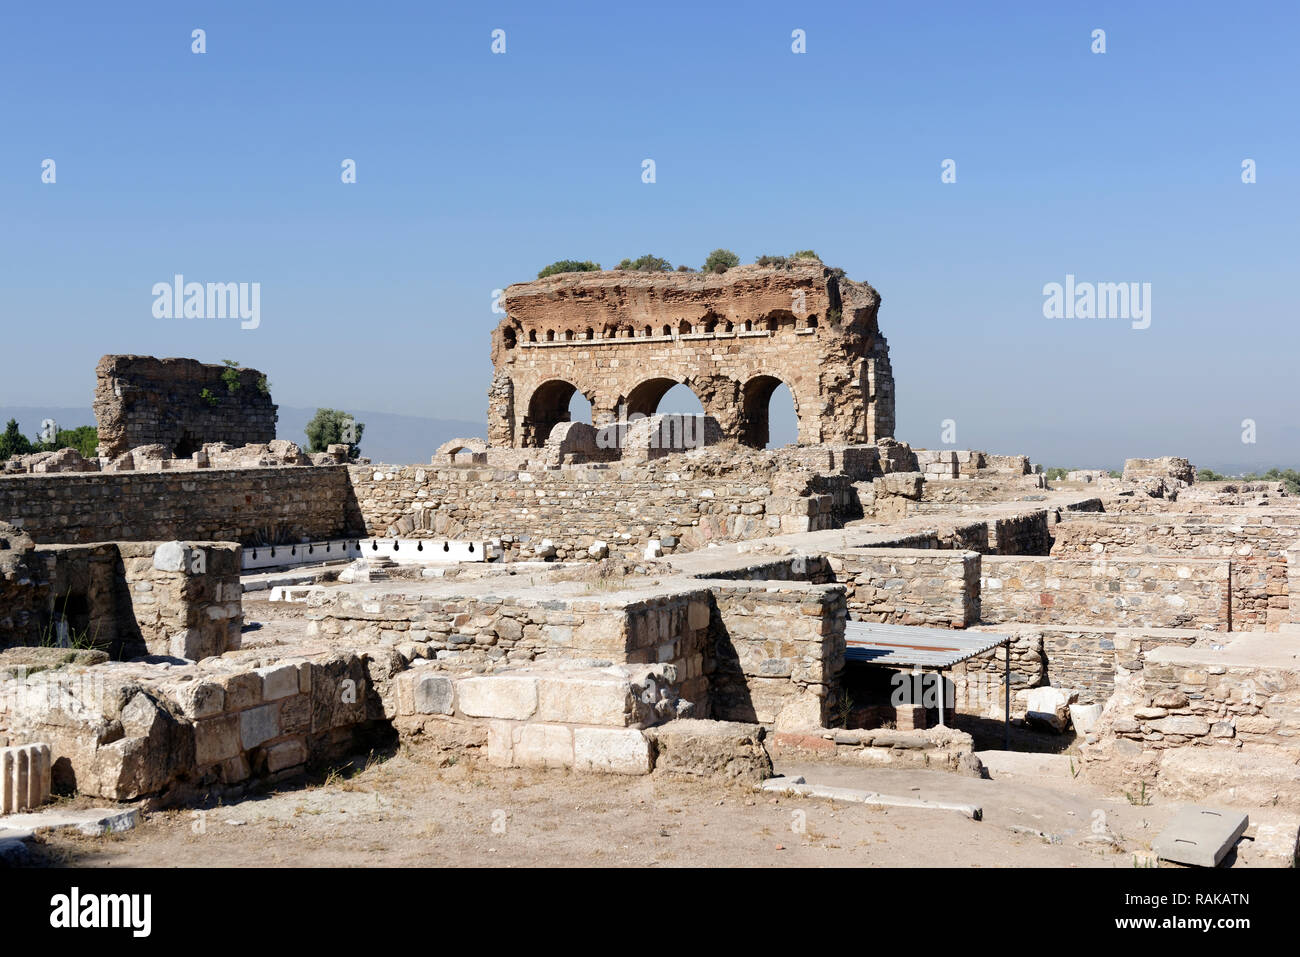 View towards the imposing three arched structure that is part of the Bath-Gymnasium complex, ancient city of Tralleis, Aydin, Anatolia, Turkey. Dated  Stock Photo